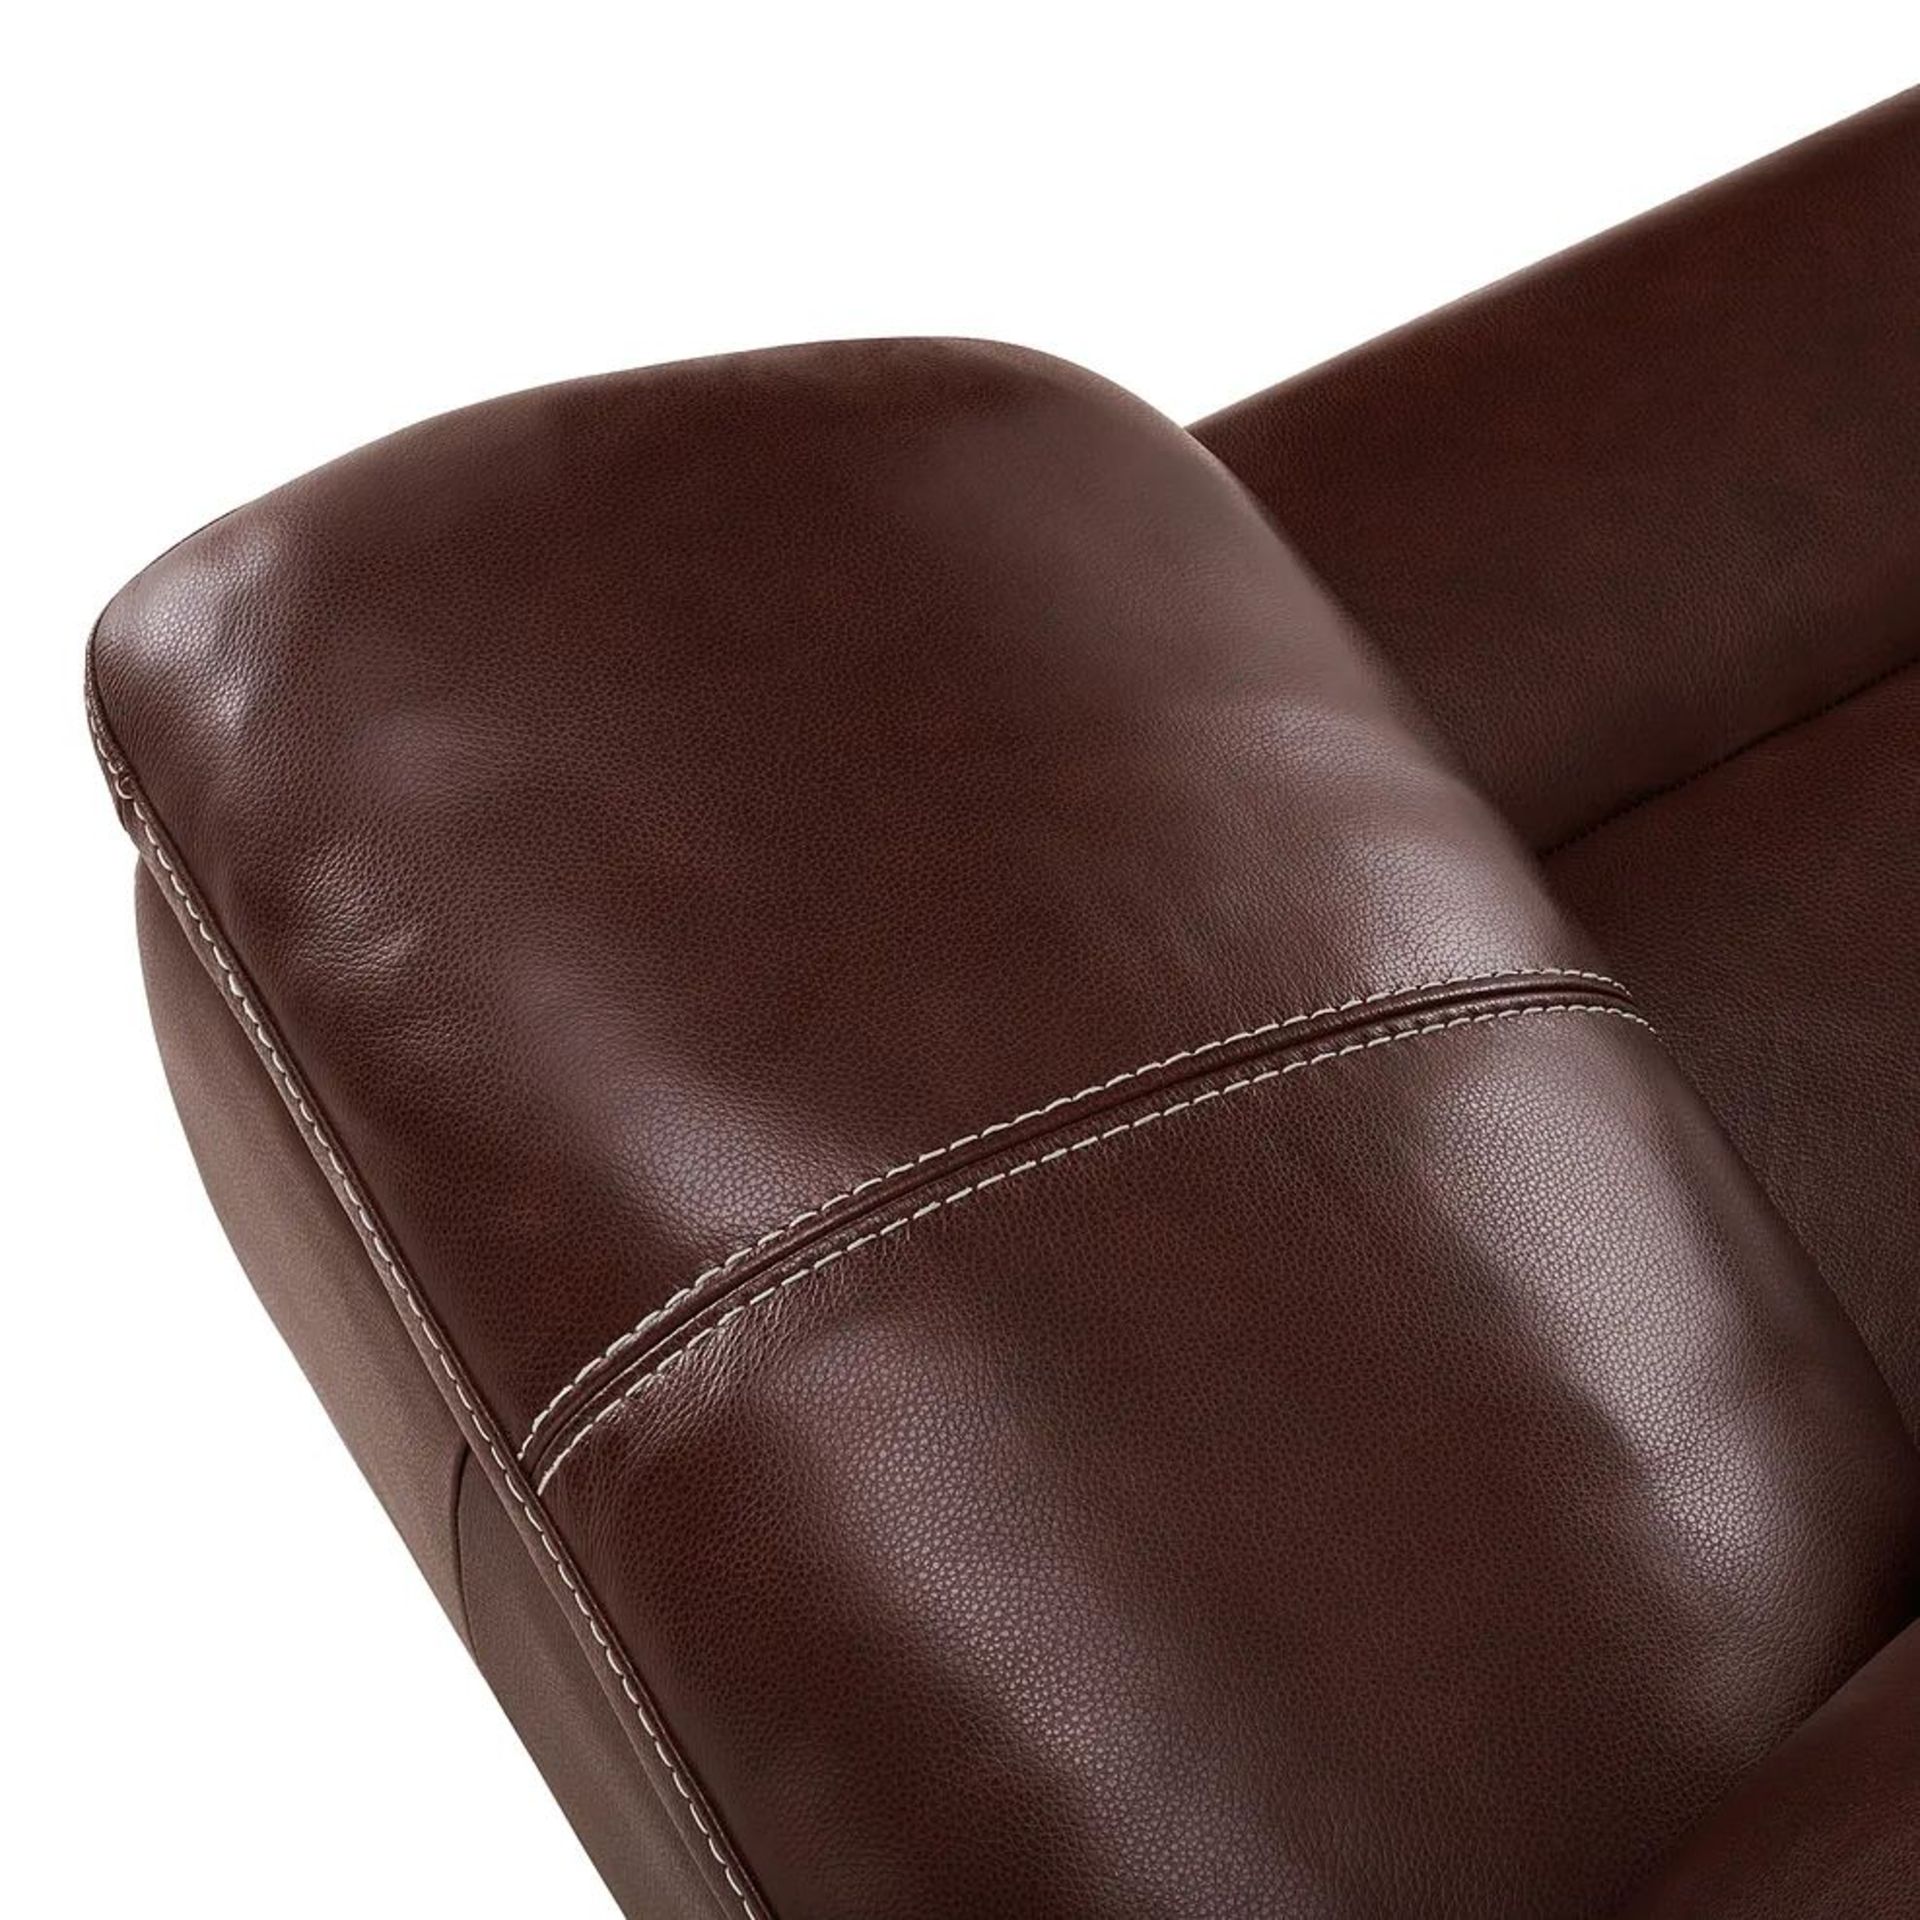 BRAND NEW ARLINGTON Electric Recliner Armchair - TAN LEATHER. RRP £1199. Create a traditional and - Image 11 of 12